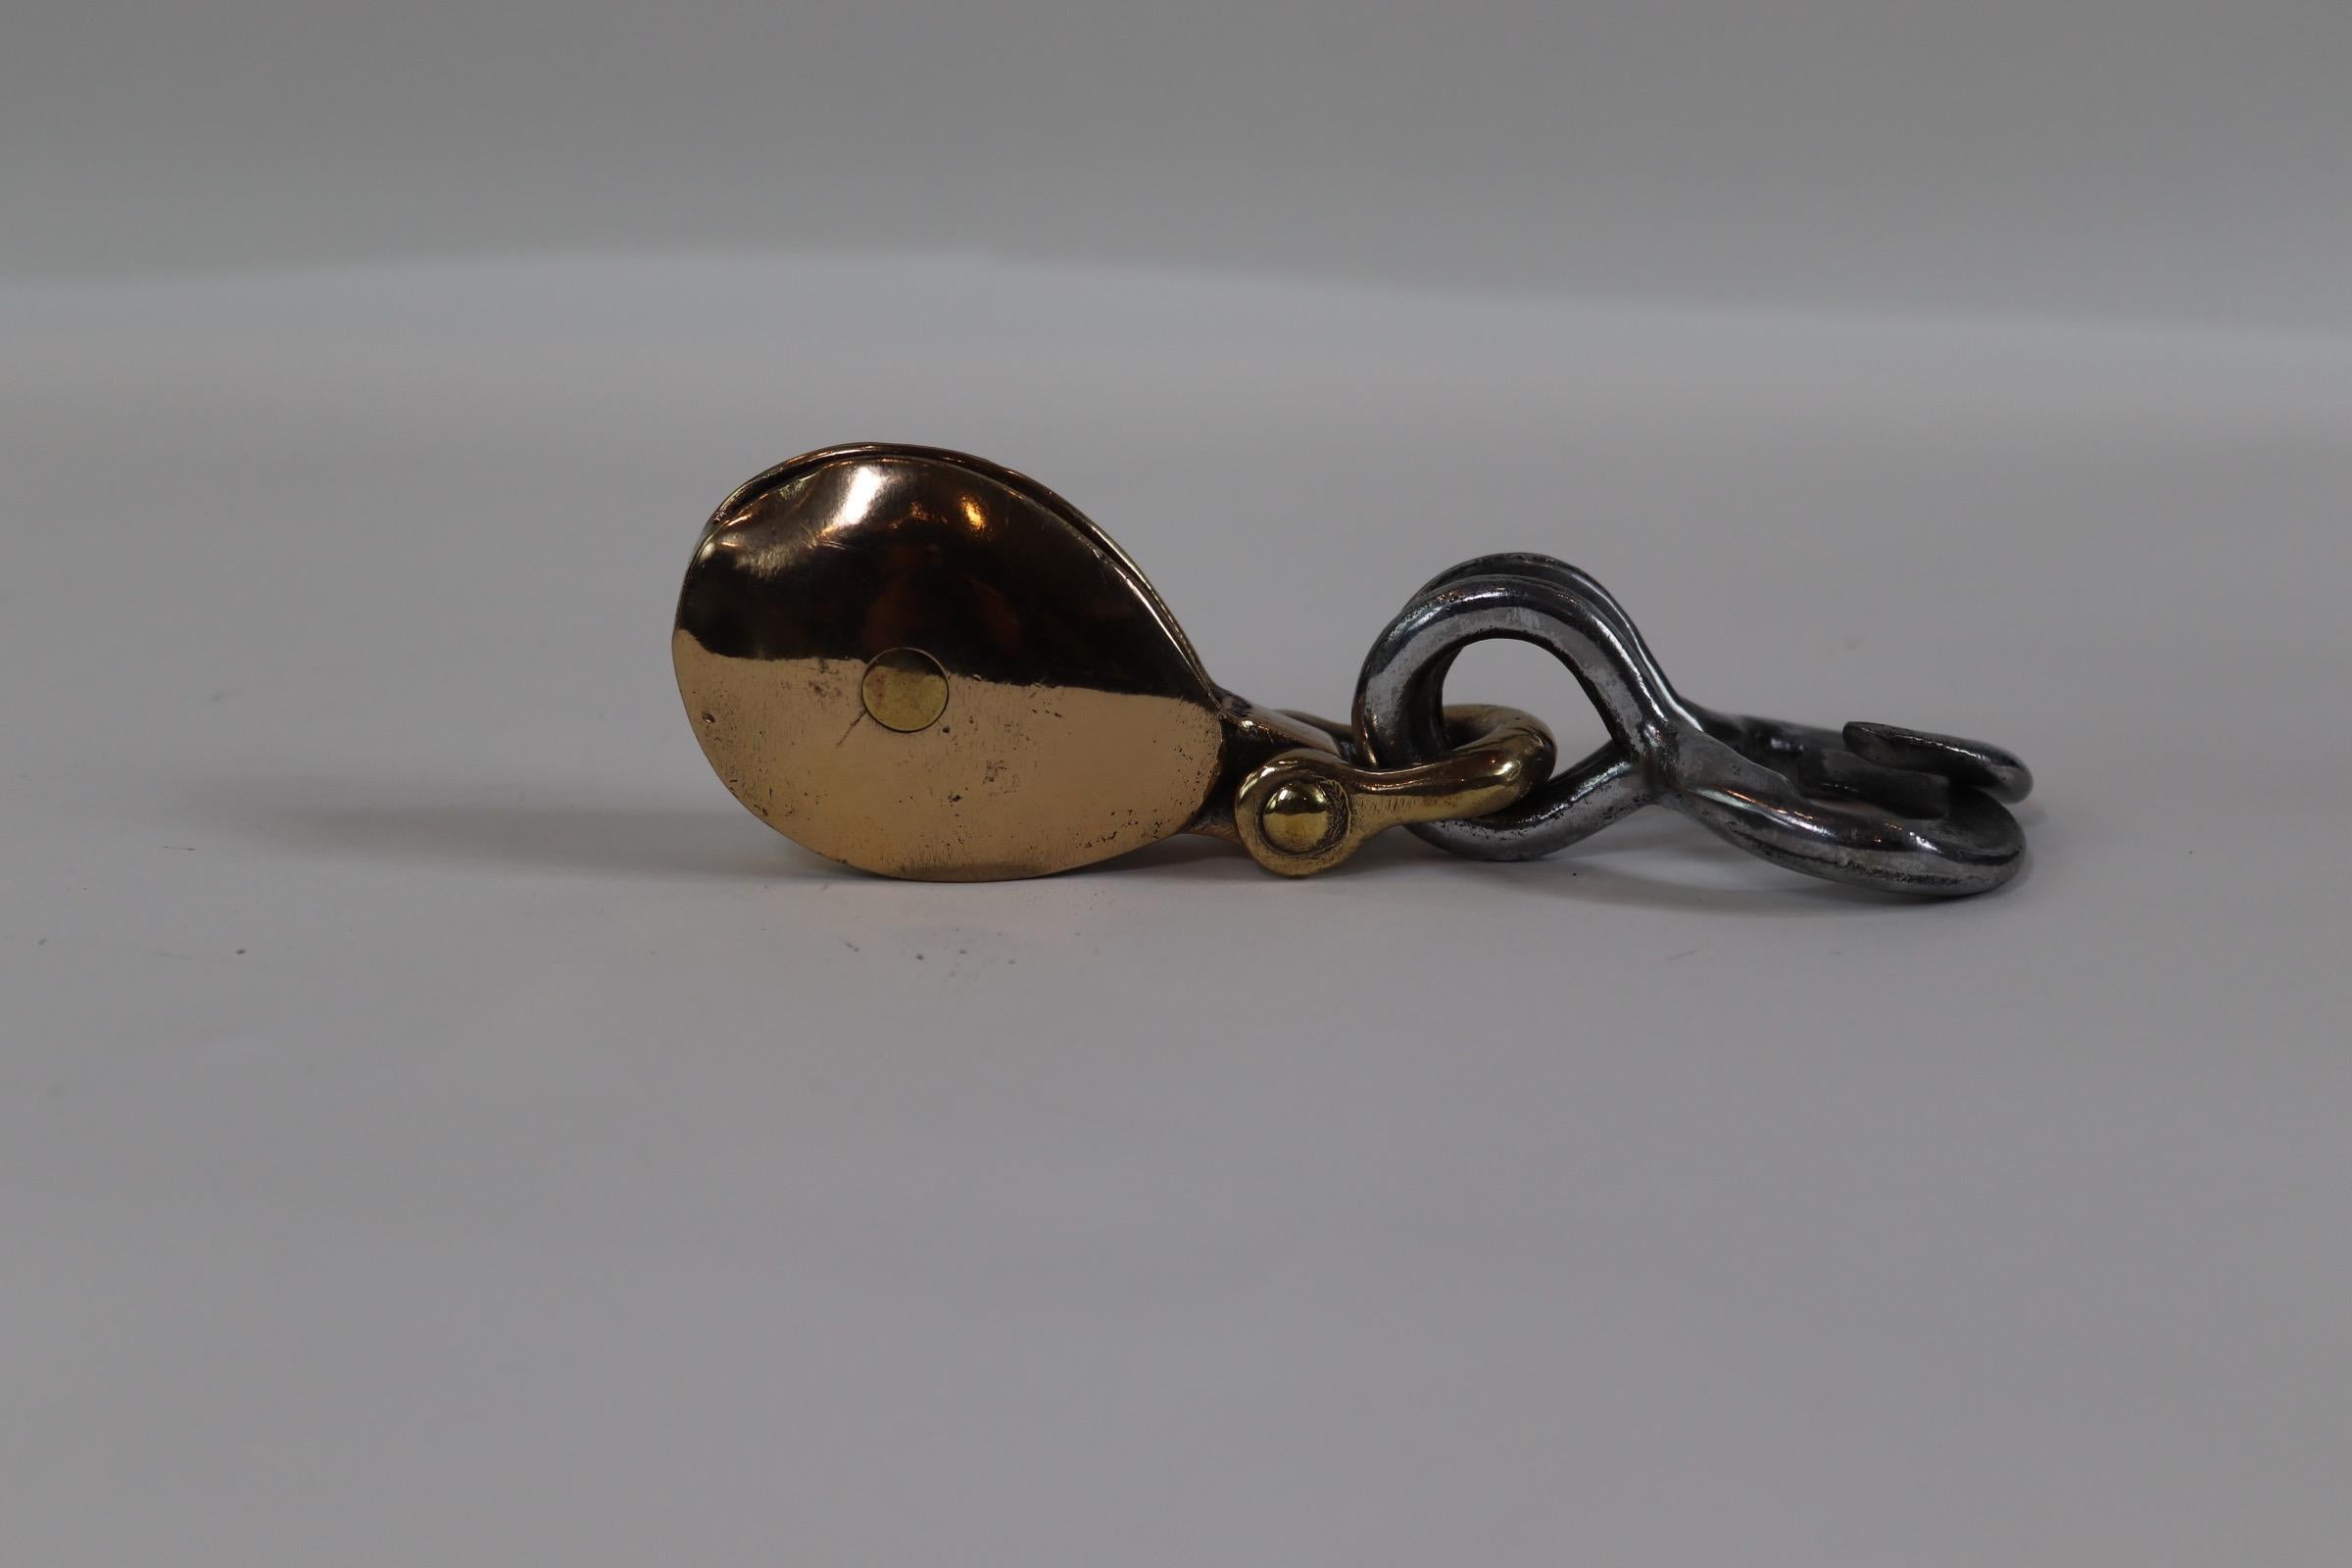 Polished and lacquered yacht pulley with two attached steel hooks. Weight is 1 pound. X-131